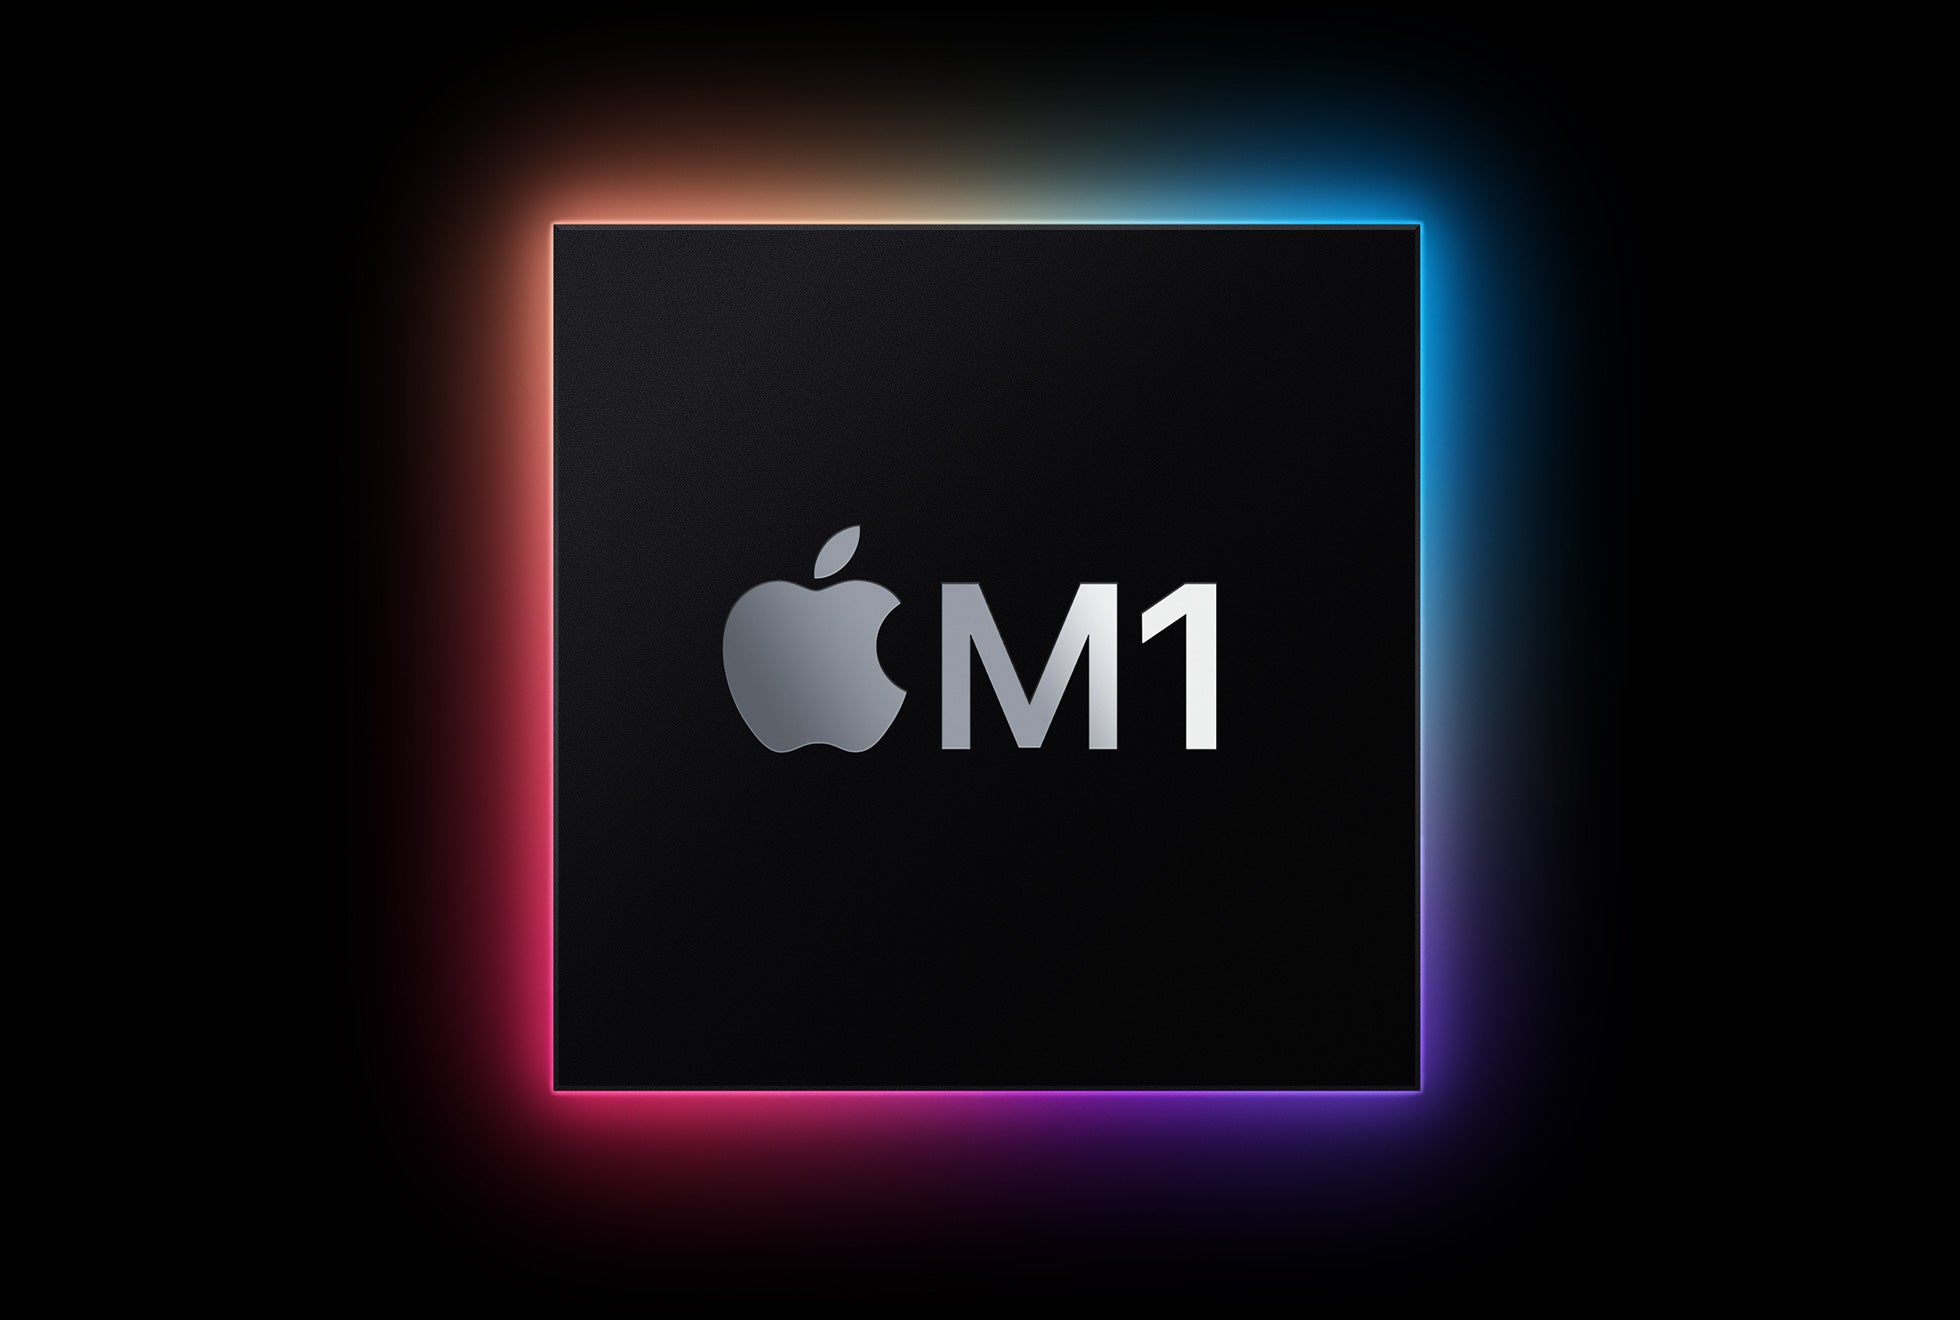 The Apple M1 and Big Tech's pursuit of its own silicon